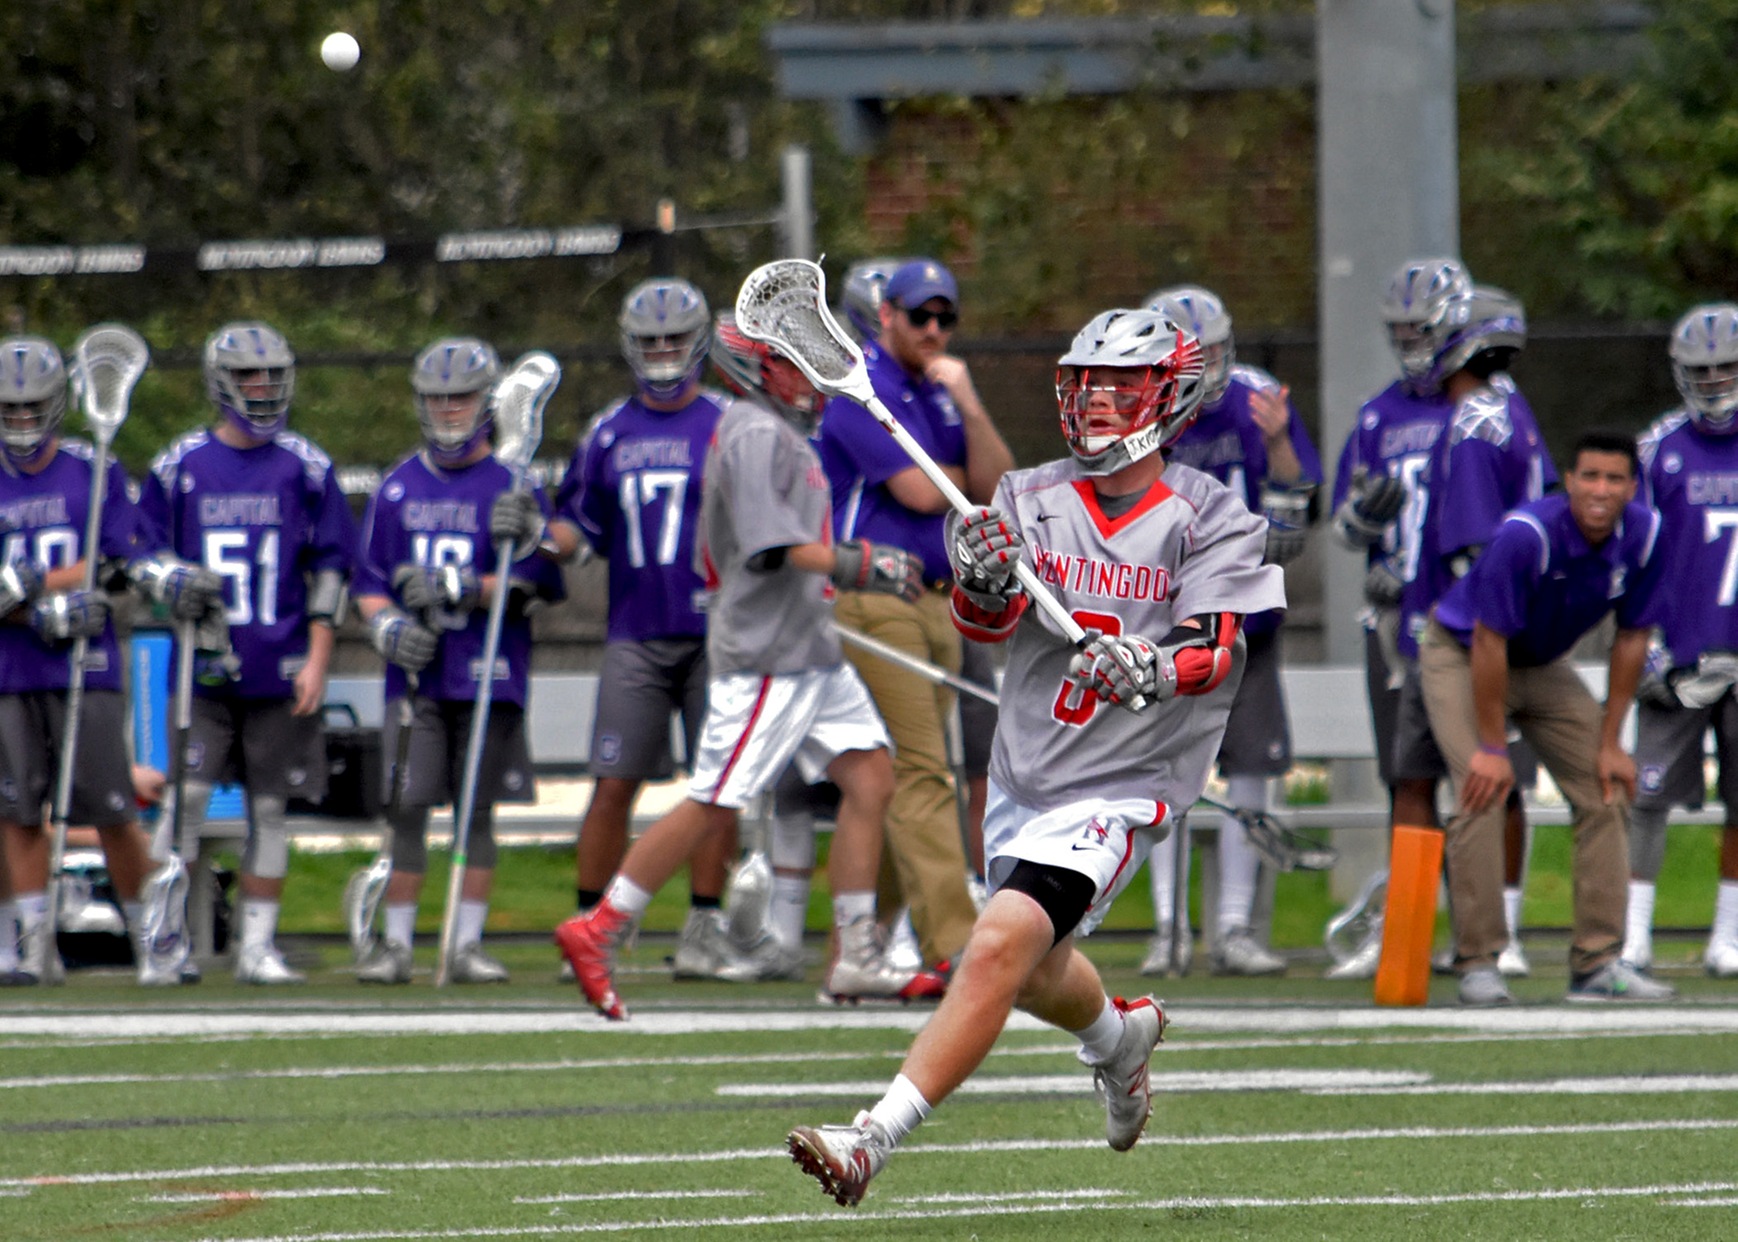 Sophomore Miles Stading scored four goals in Monday's 15-10 loss to Southwestern. (Photo by Wesley Lyle)